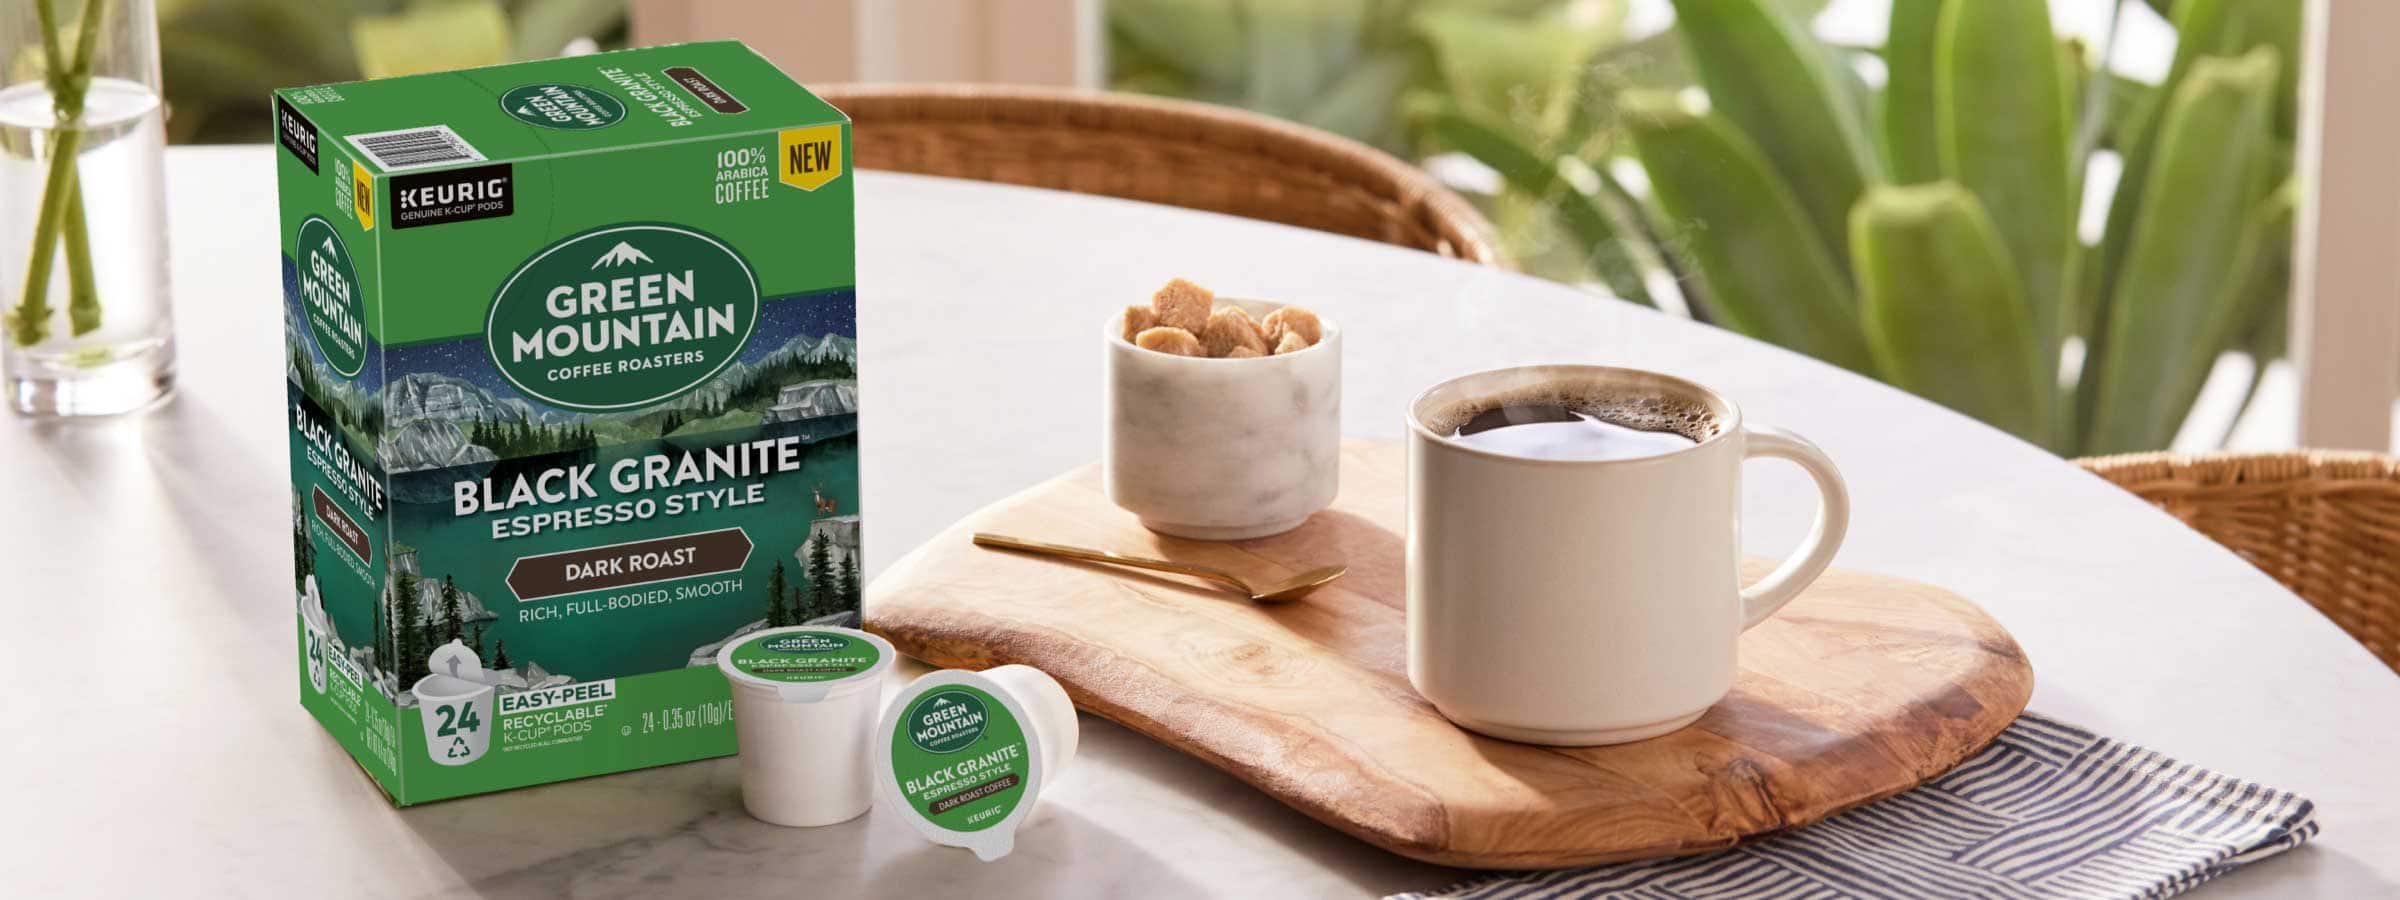 100% of k-cup pods are recyclable - including gmcr black granite